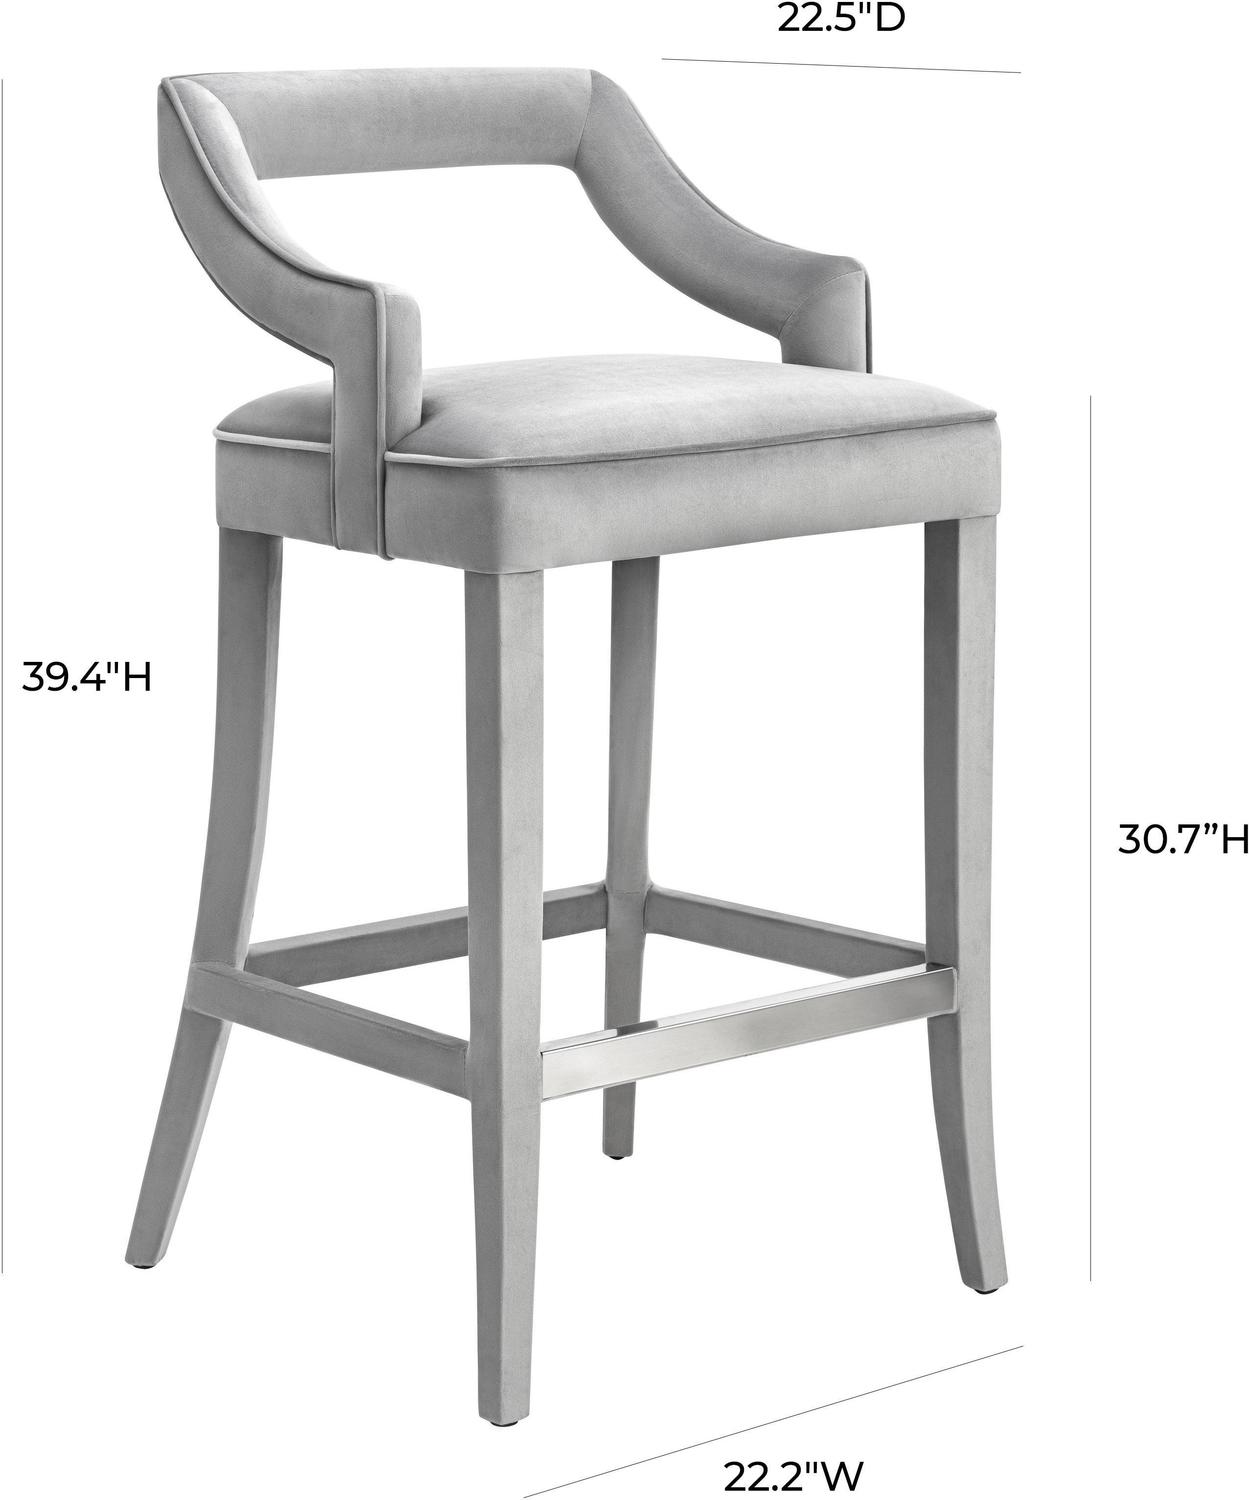 set of 4 bar stools with backs Contemporary Design Furniture Stools Bar Chairs and Stools Grey